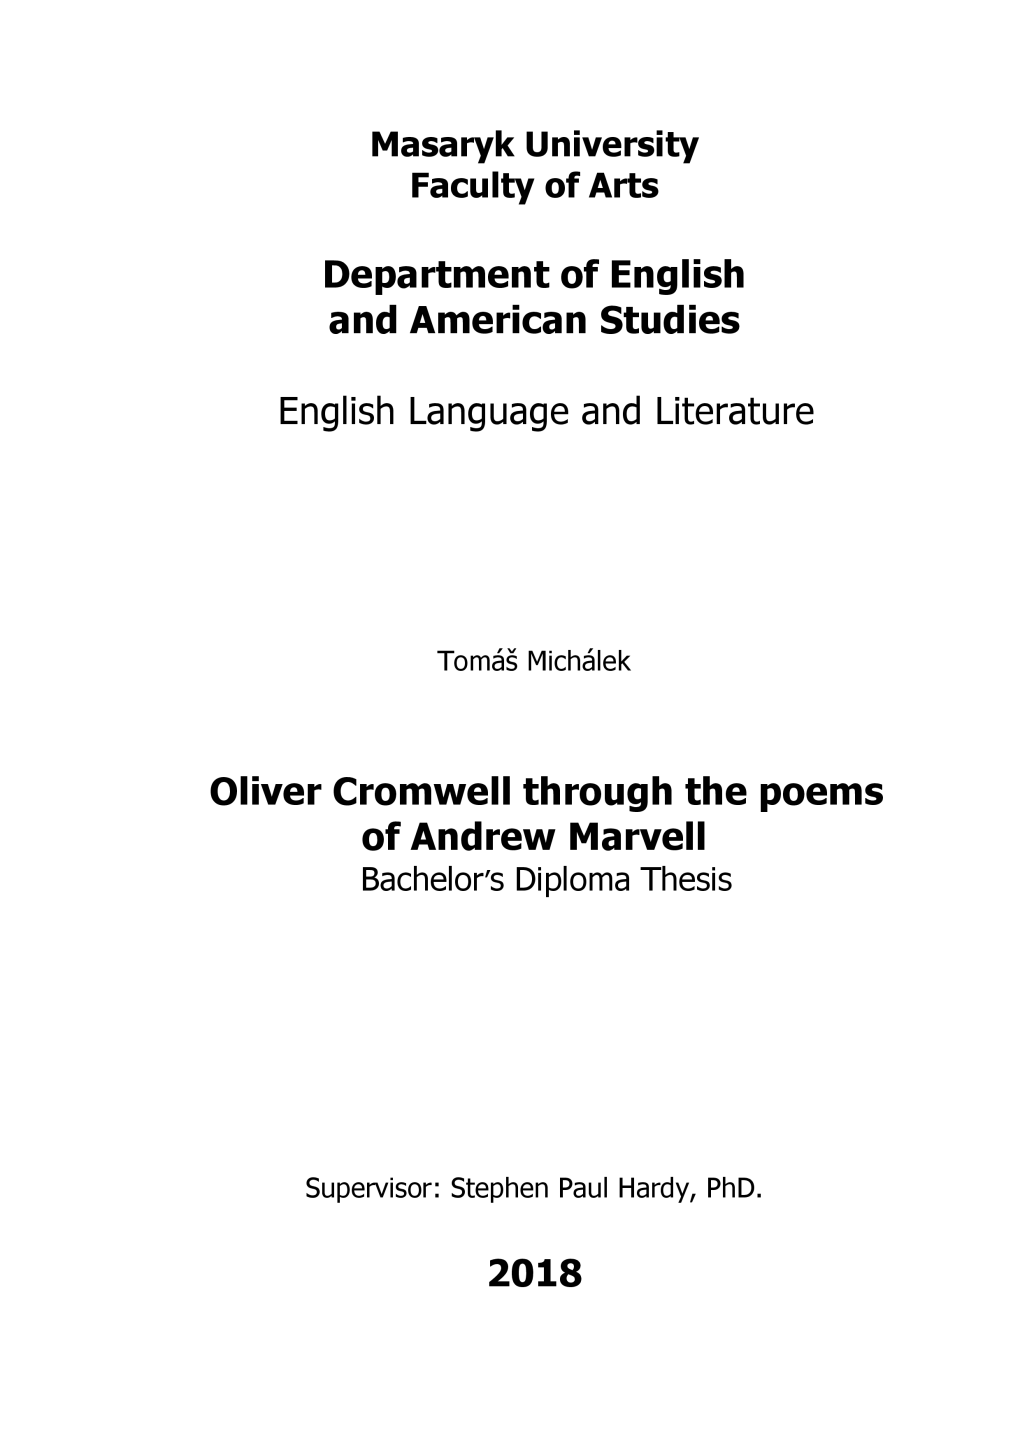 Department of English and American Studies Oliver Cromwell Through